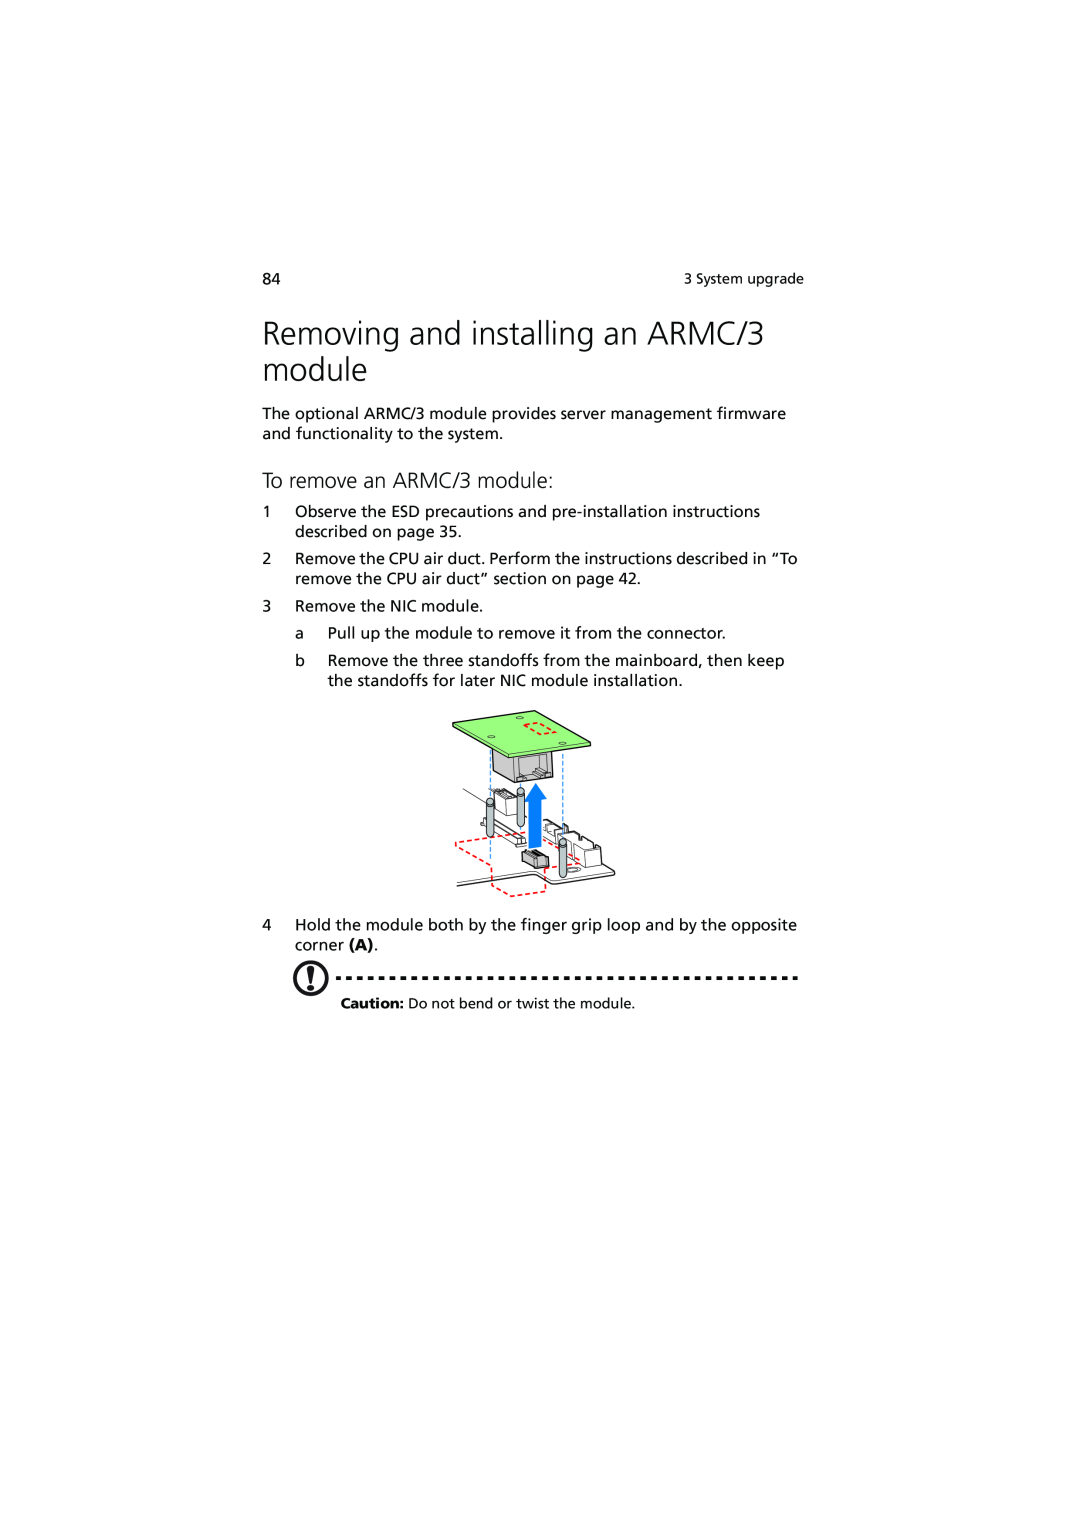 Acer R720 Series manual Removing and installing an ARMC/3 module, To remove an ARMC/3 module 